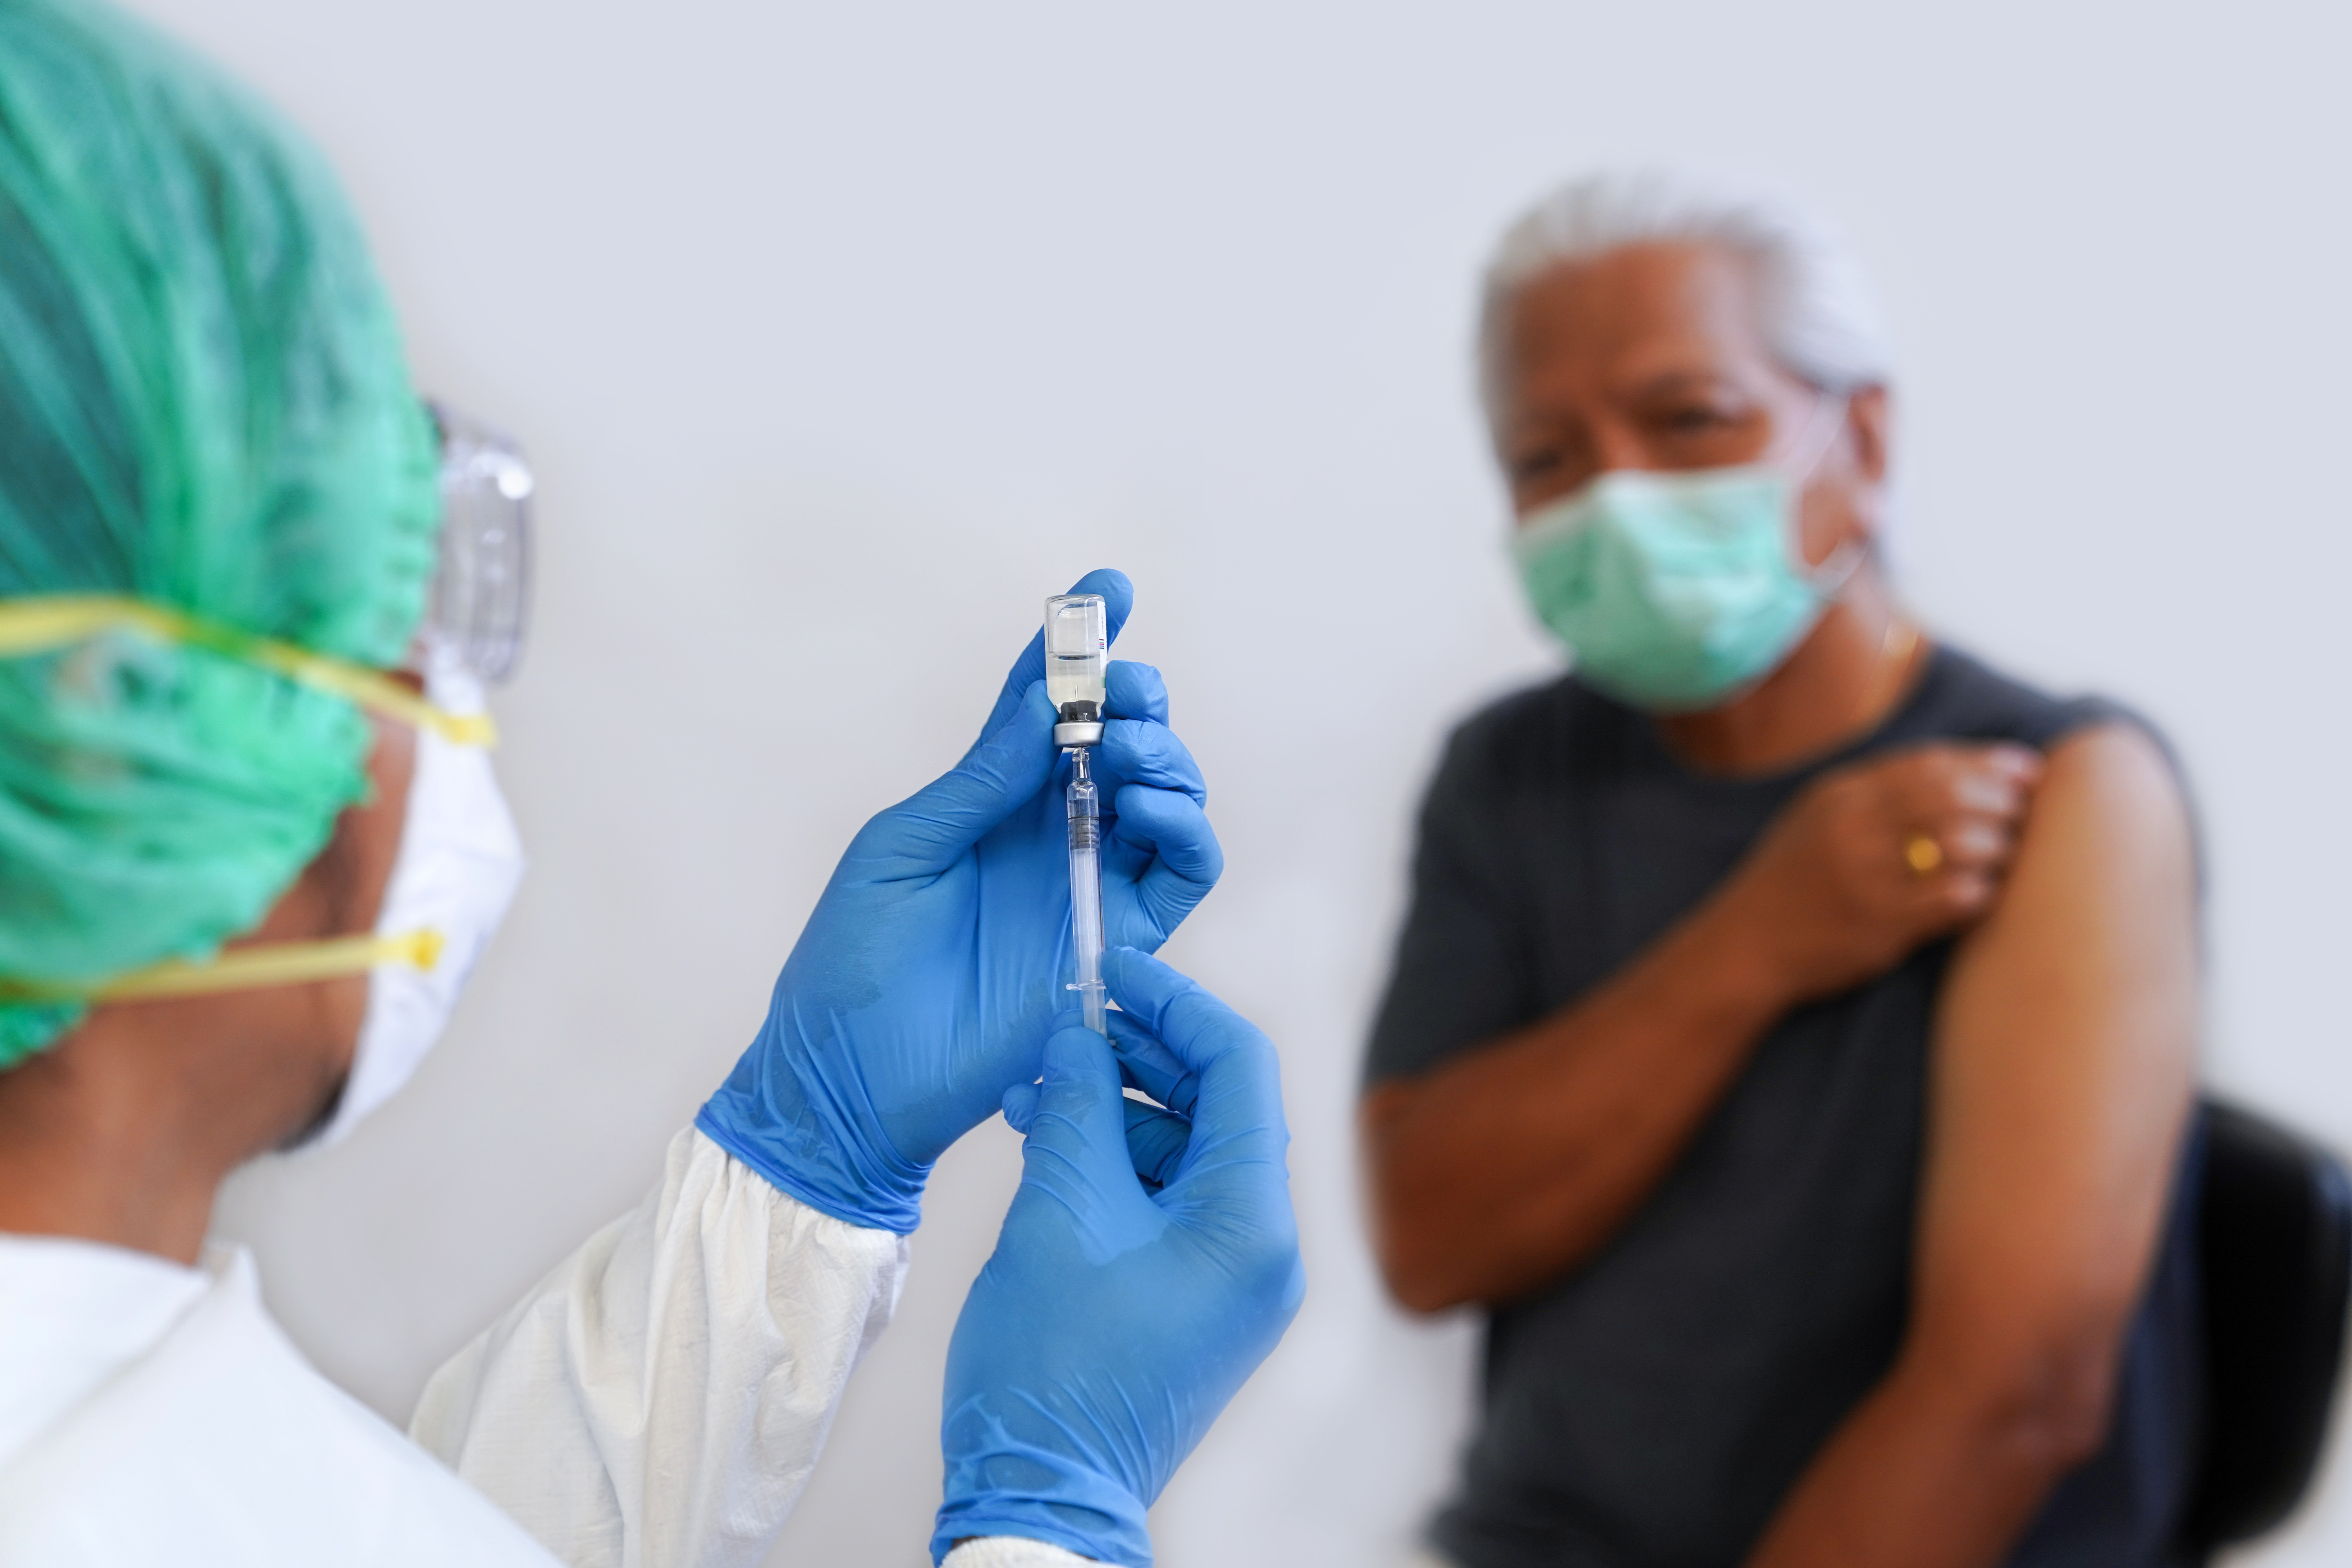 Image of woman wearing a surgical mask pulling up her sleeve as a medical worker prepared a vaccine.